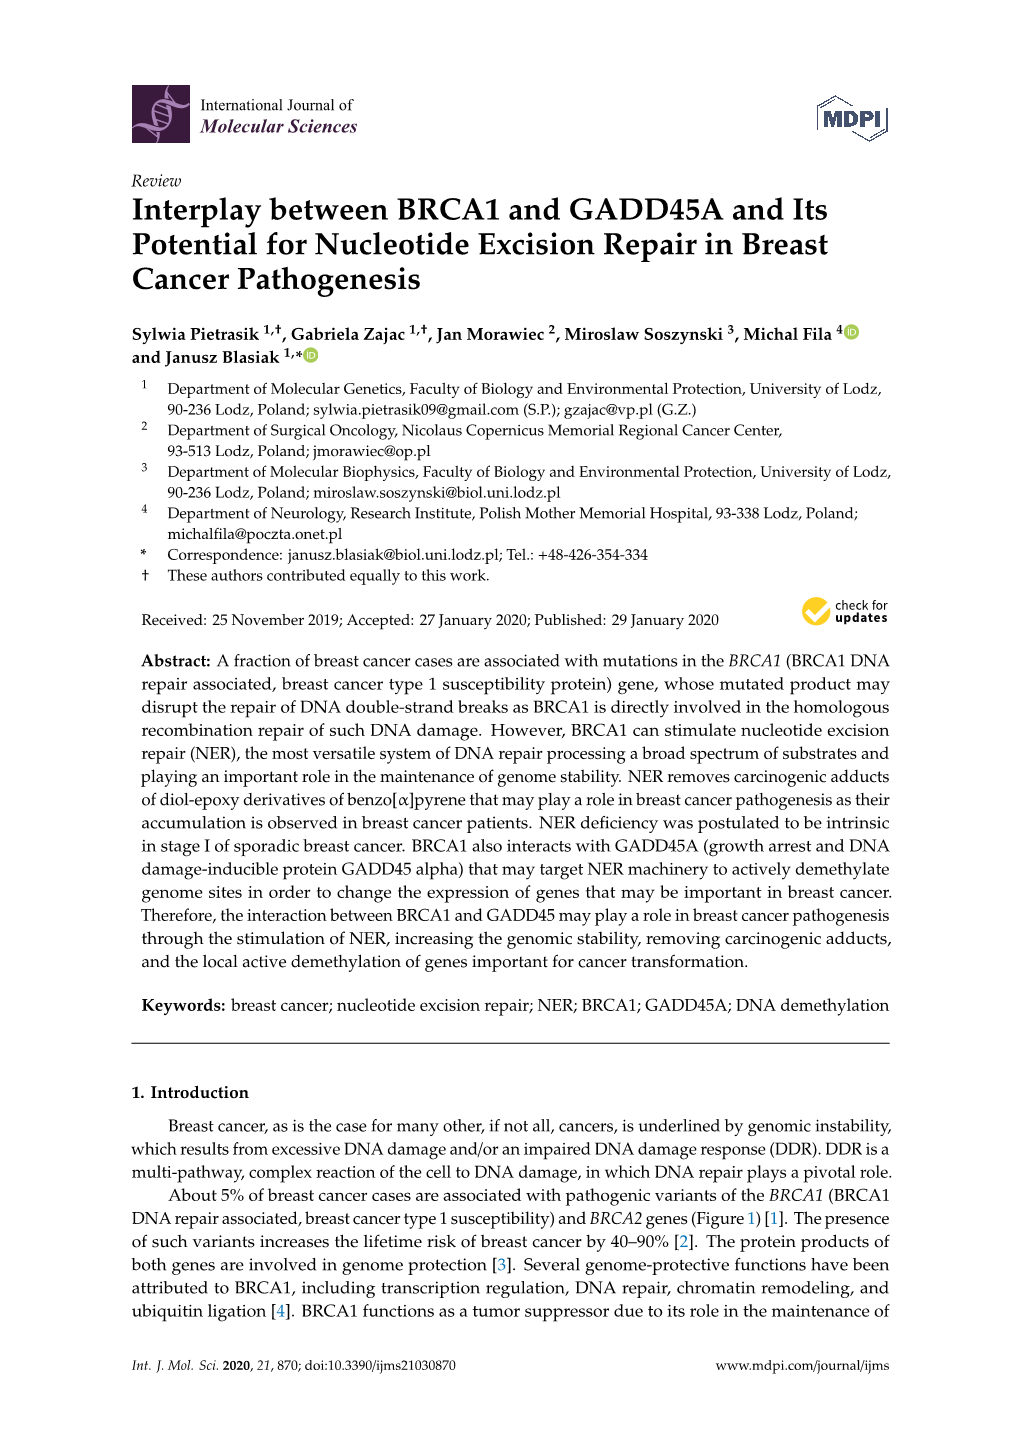 Interplay Between BRCA1 and GADD45A and Its Potential for Nucleotide Excision Repair in Breast Cancer Pathogenesis